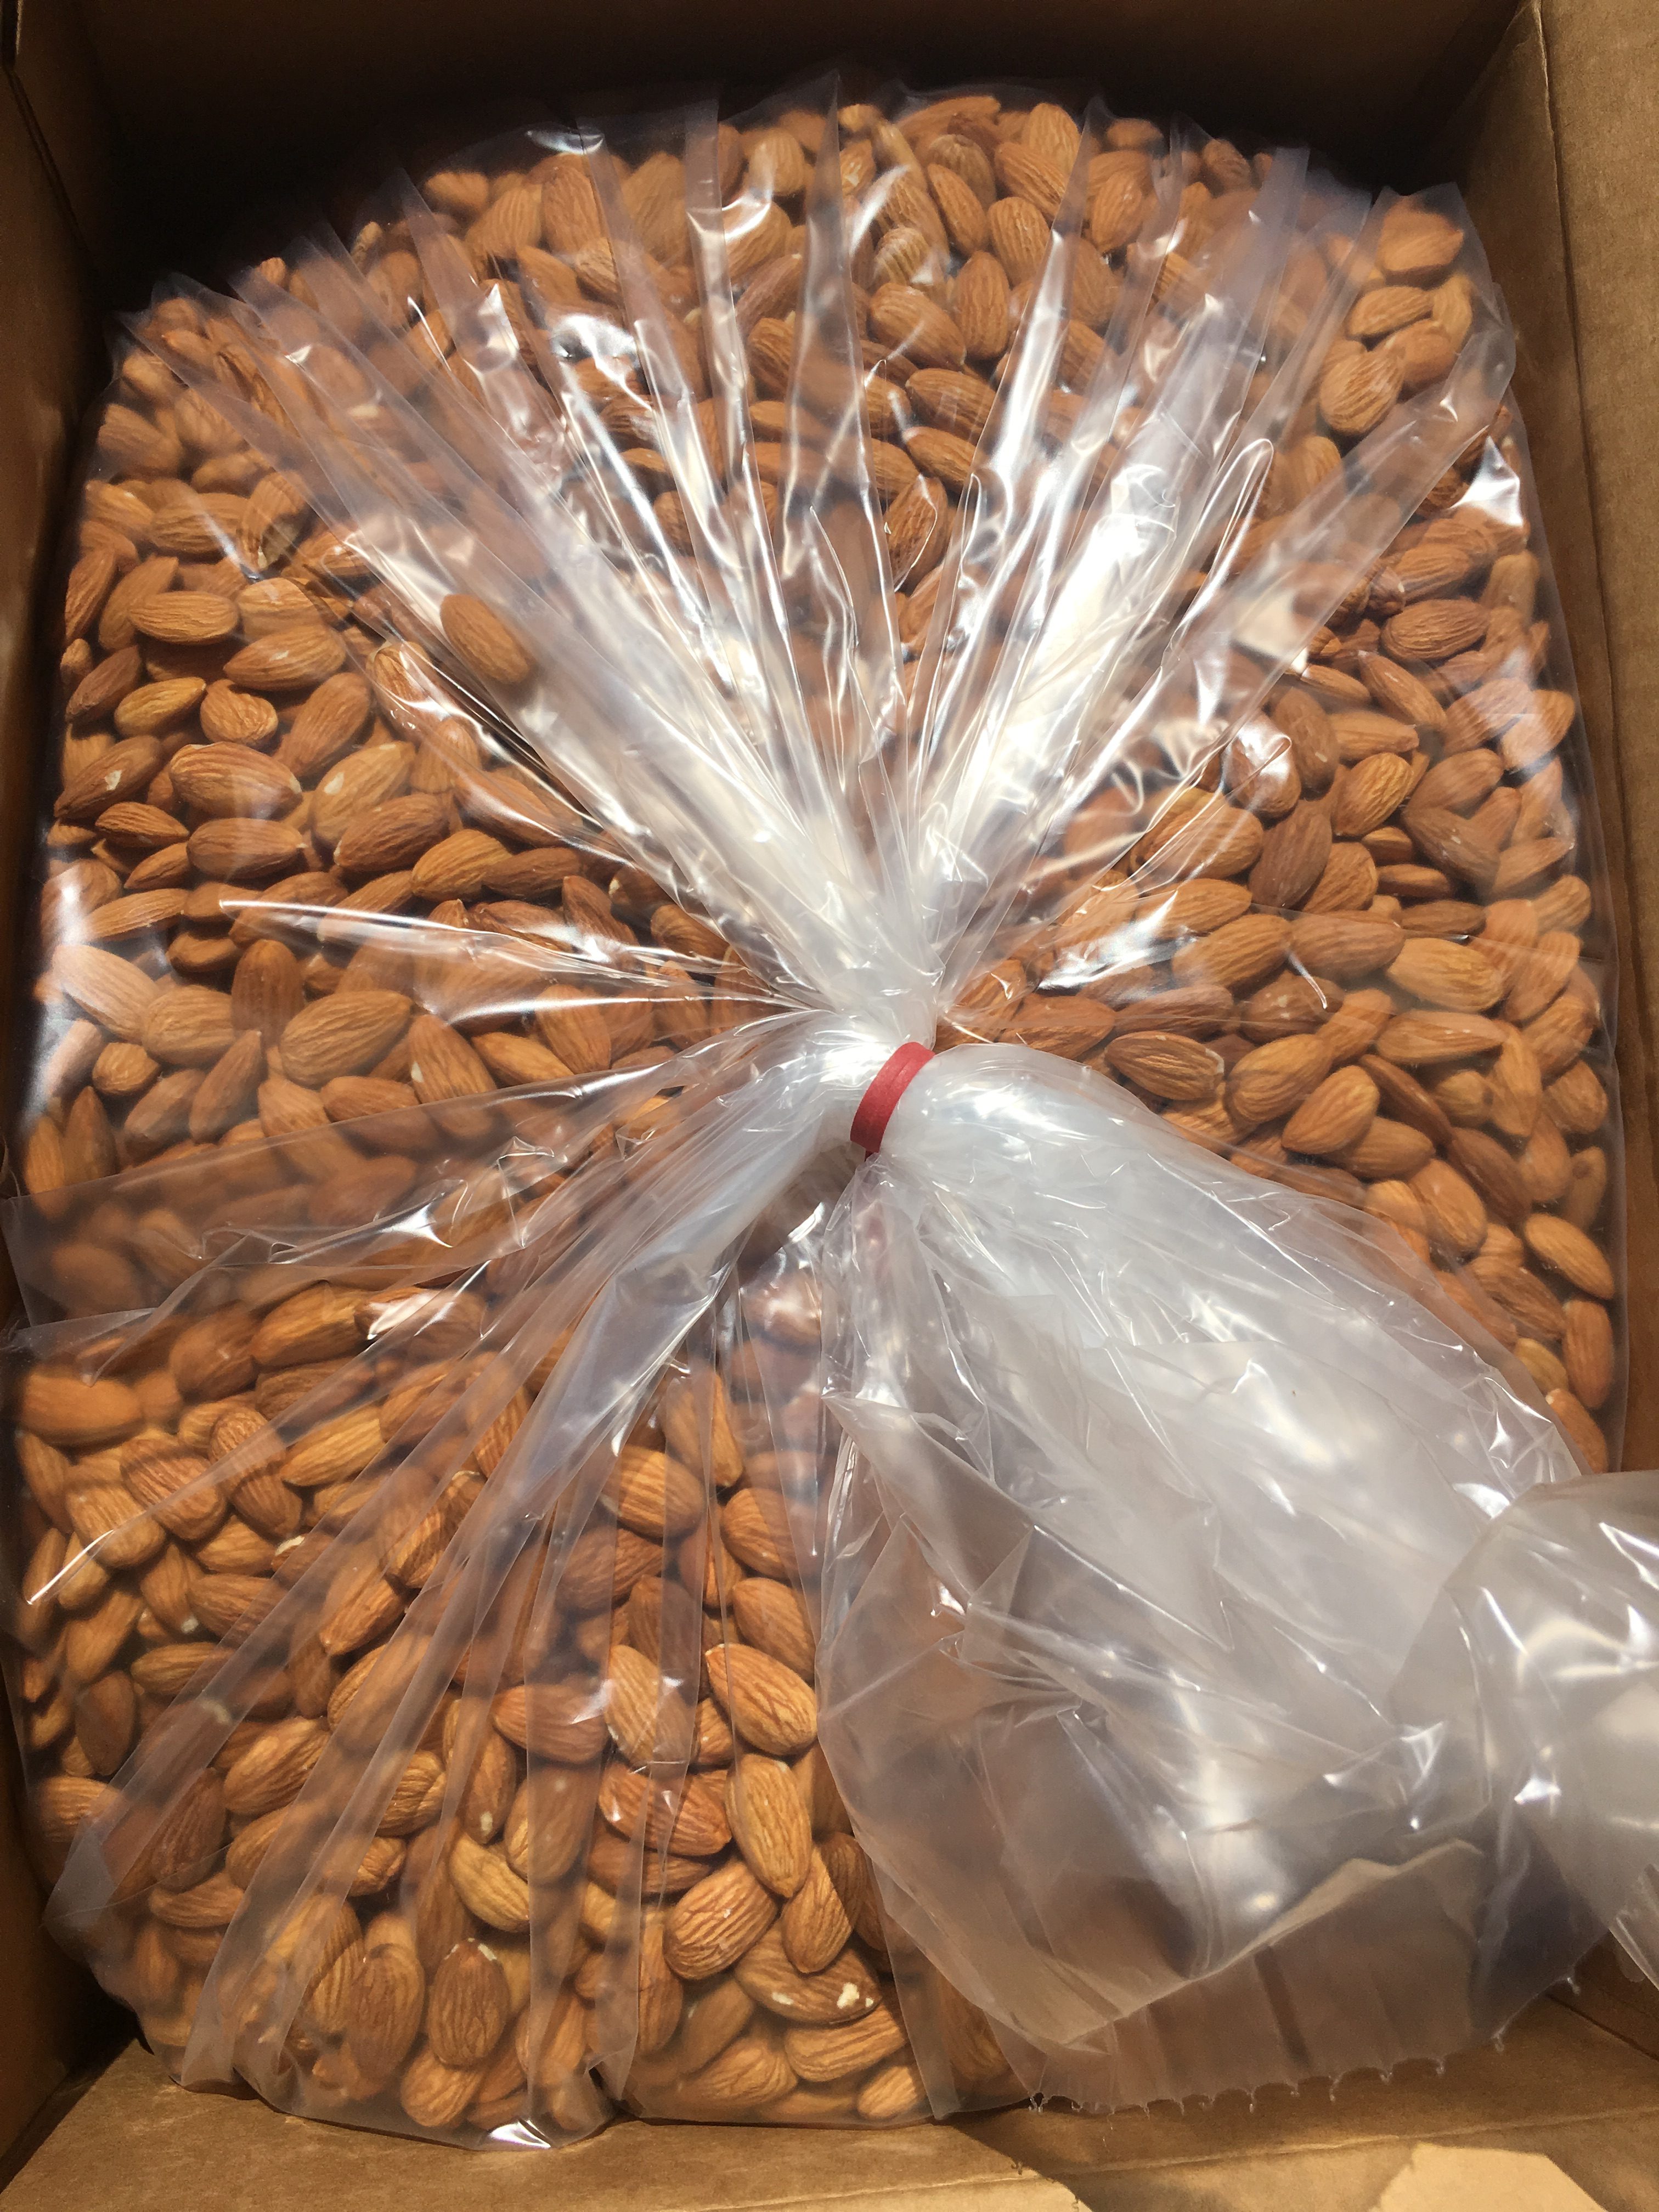 Organic Unpasteurized Almonds 100 Pounds- FREE SHIPPING!